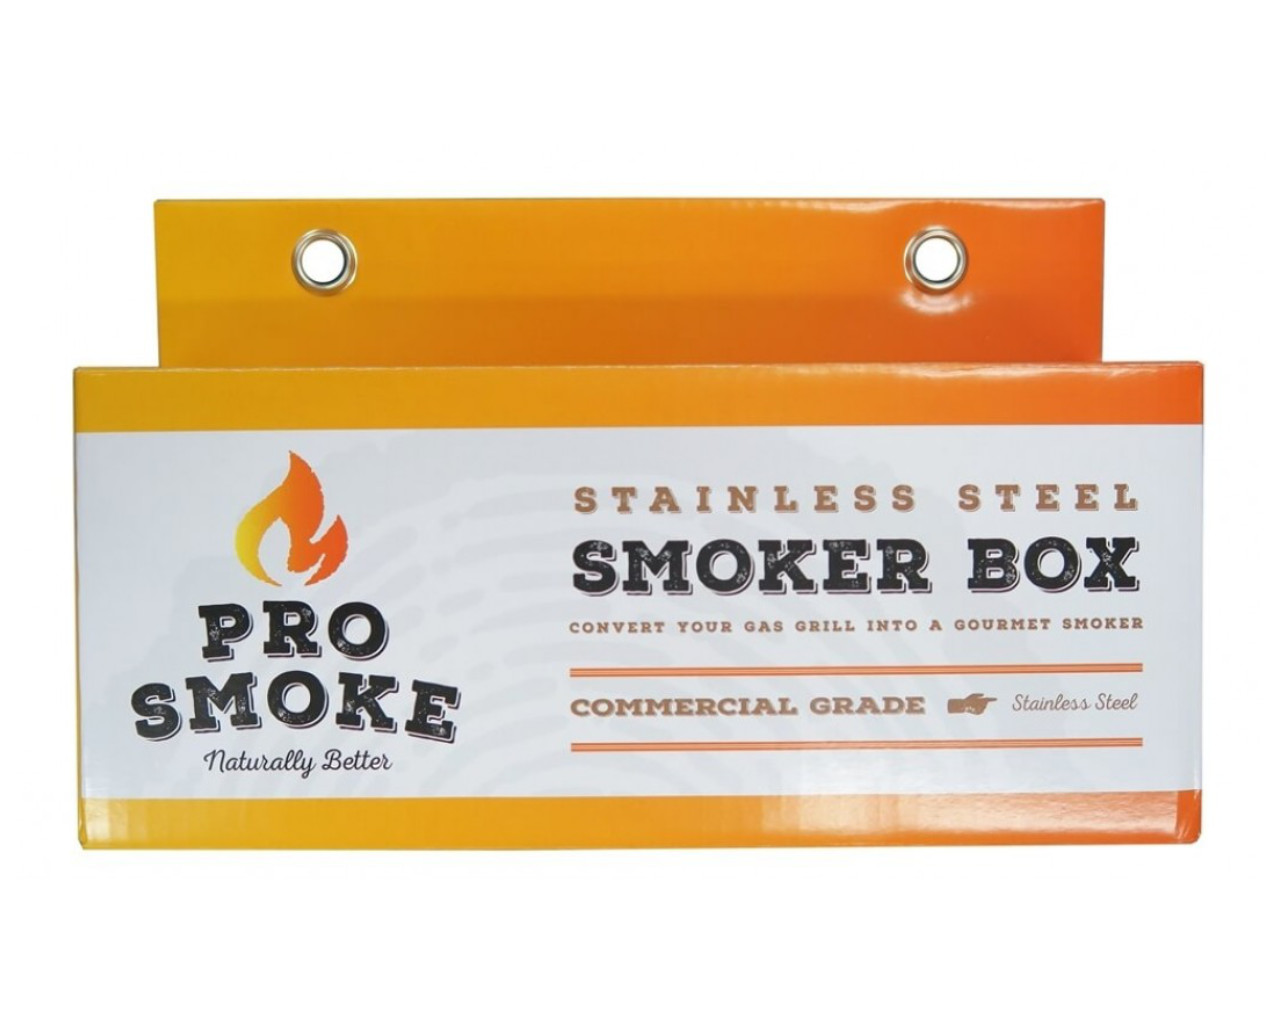 Pro Smoke Stainless Steel Smoker Box with Lid, , hi-res image number null